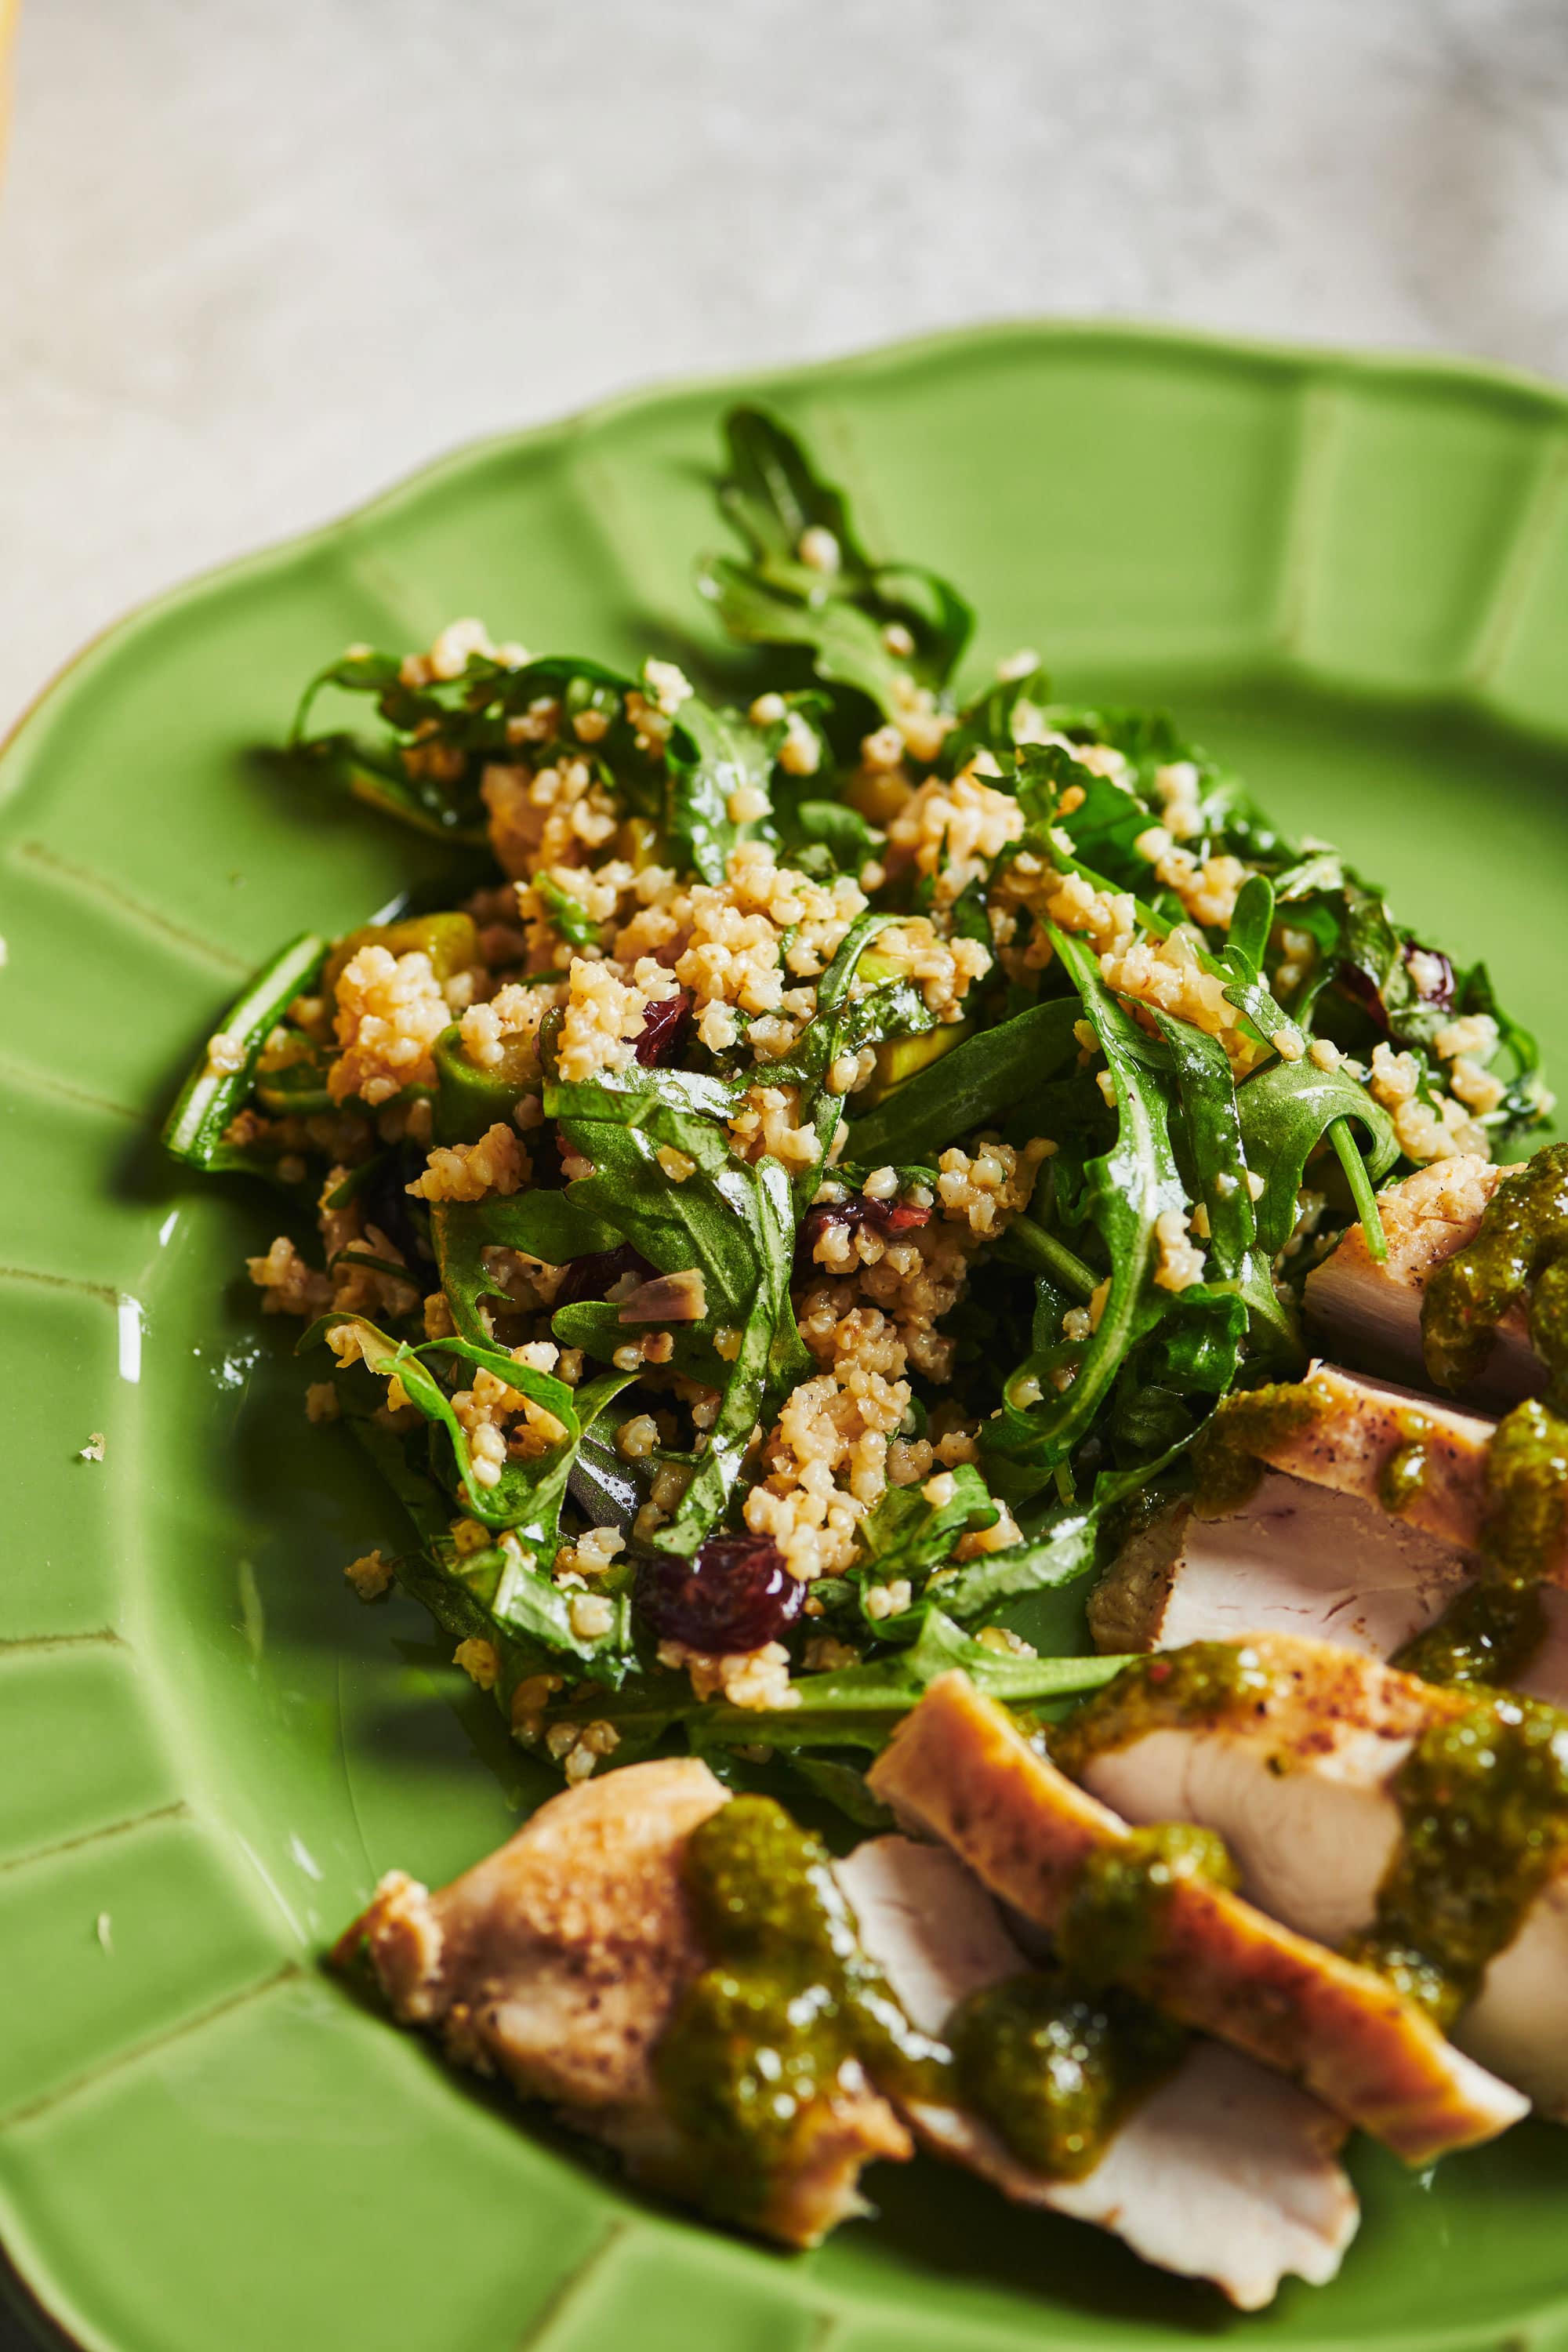 Green plate of Millet and Greens Salad.